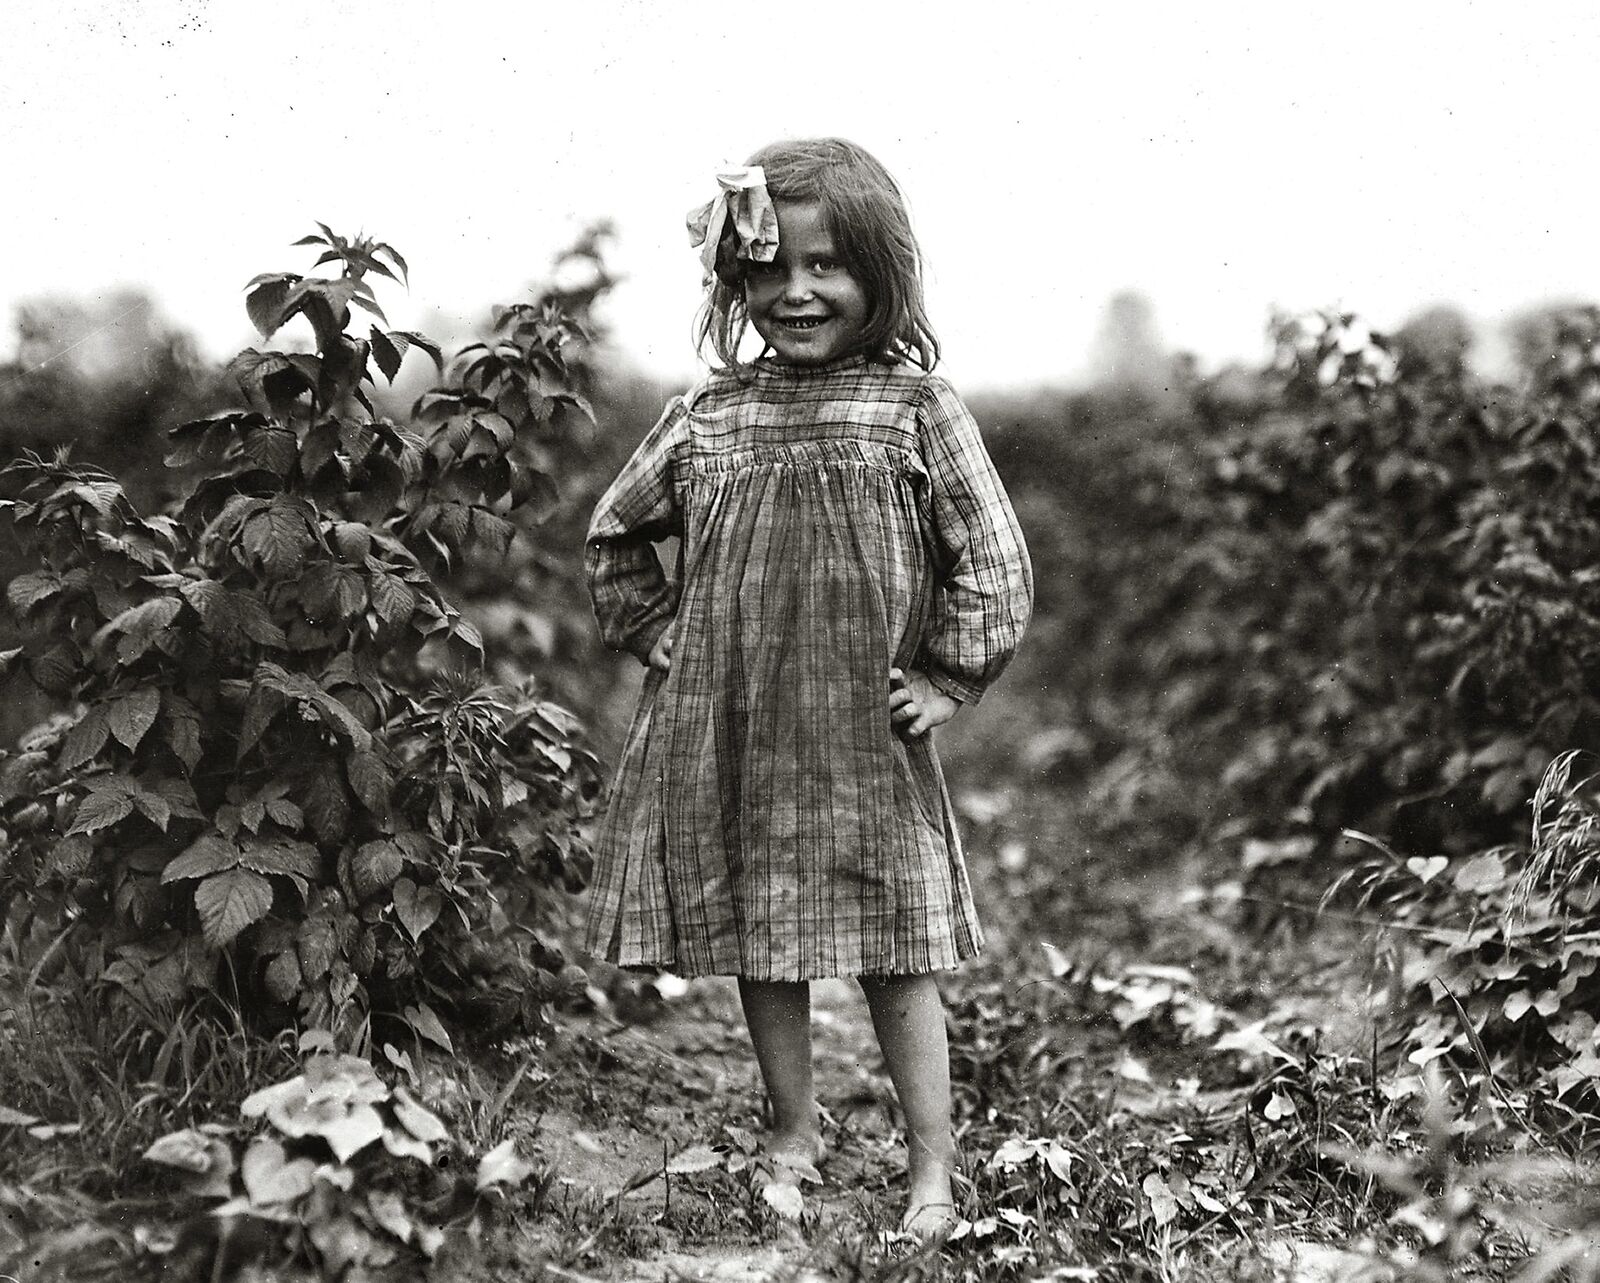 1909 CUTE 6 YEAR OLD New Jersey BERRY PICKER GIRL Child Labor Photo  (222-Q)